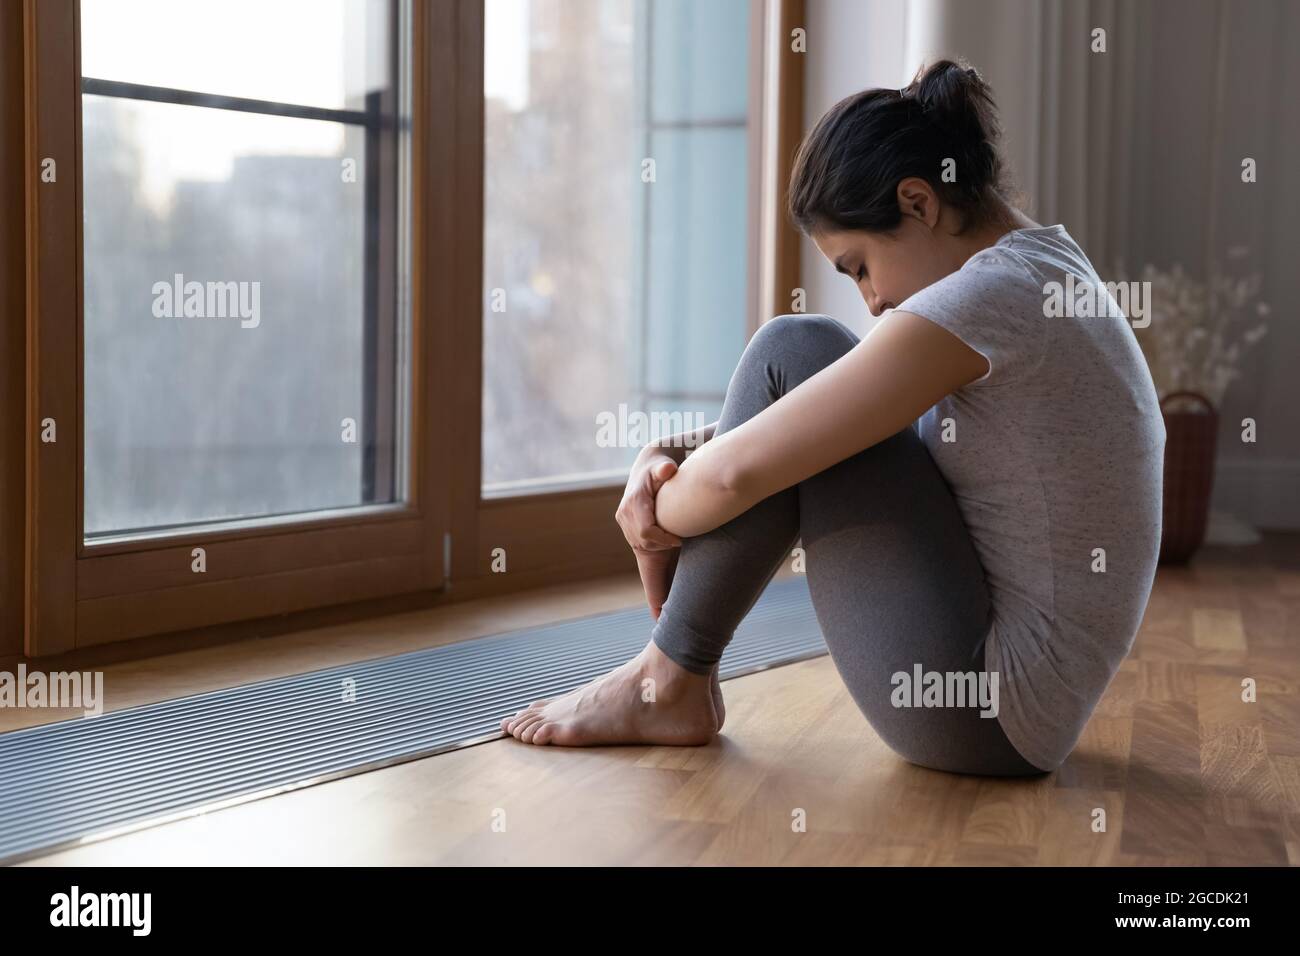 Unhappy Indian woman feel distressed at home Stock Photo